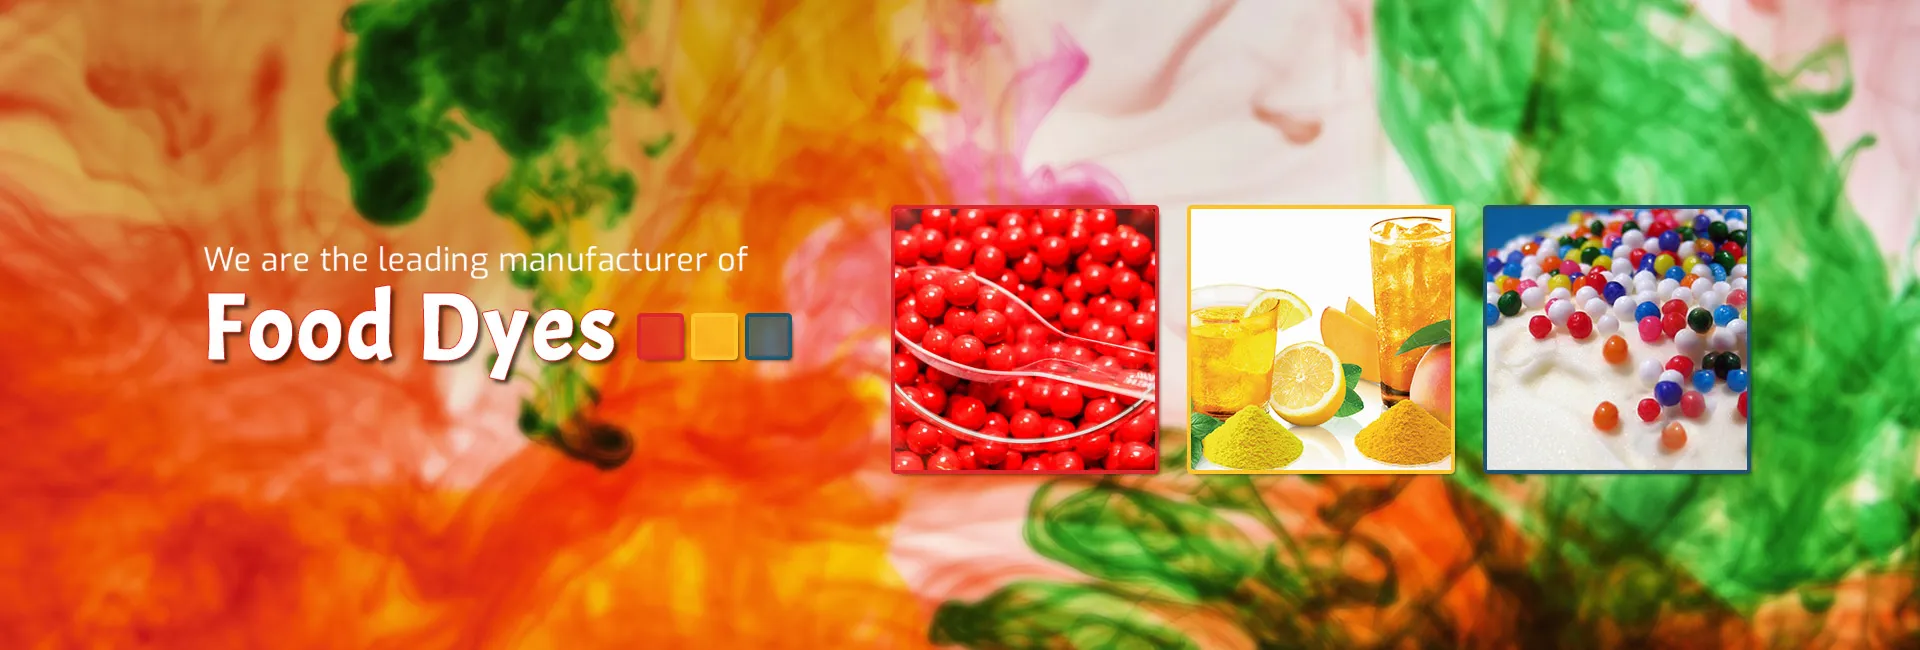 Food Dyes Manufacturer & Suppliers in Indonesia